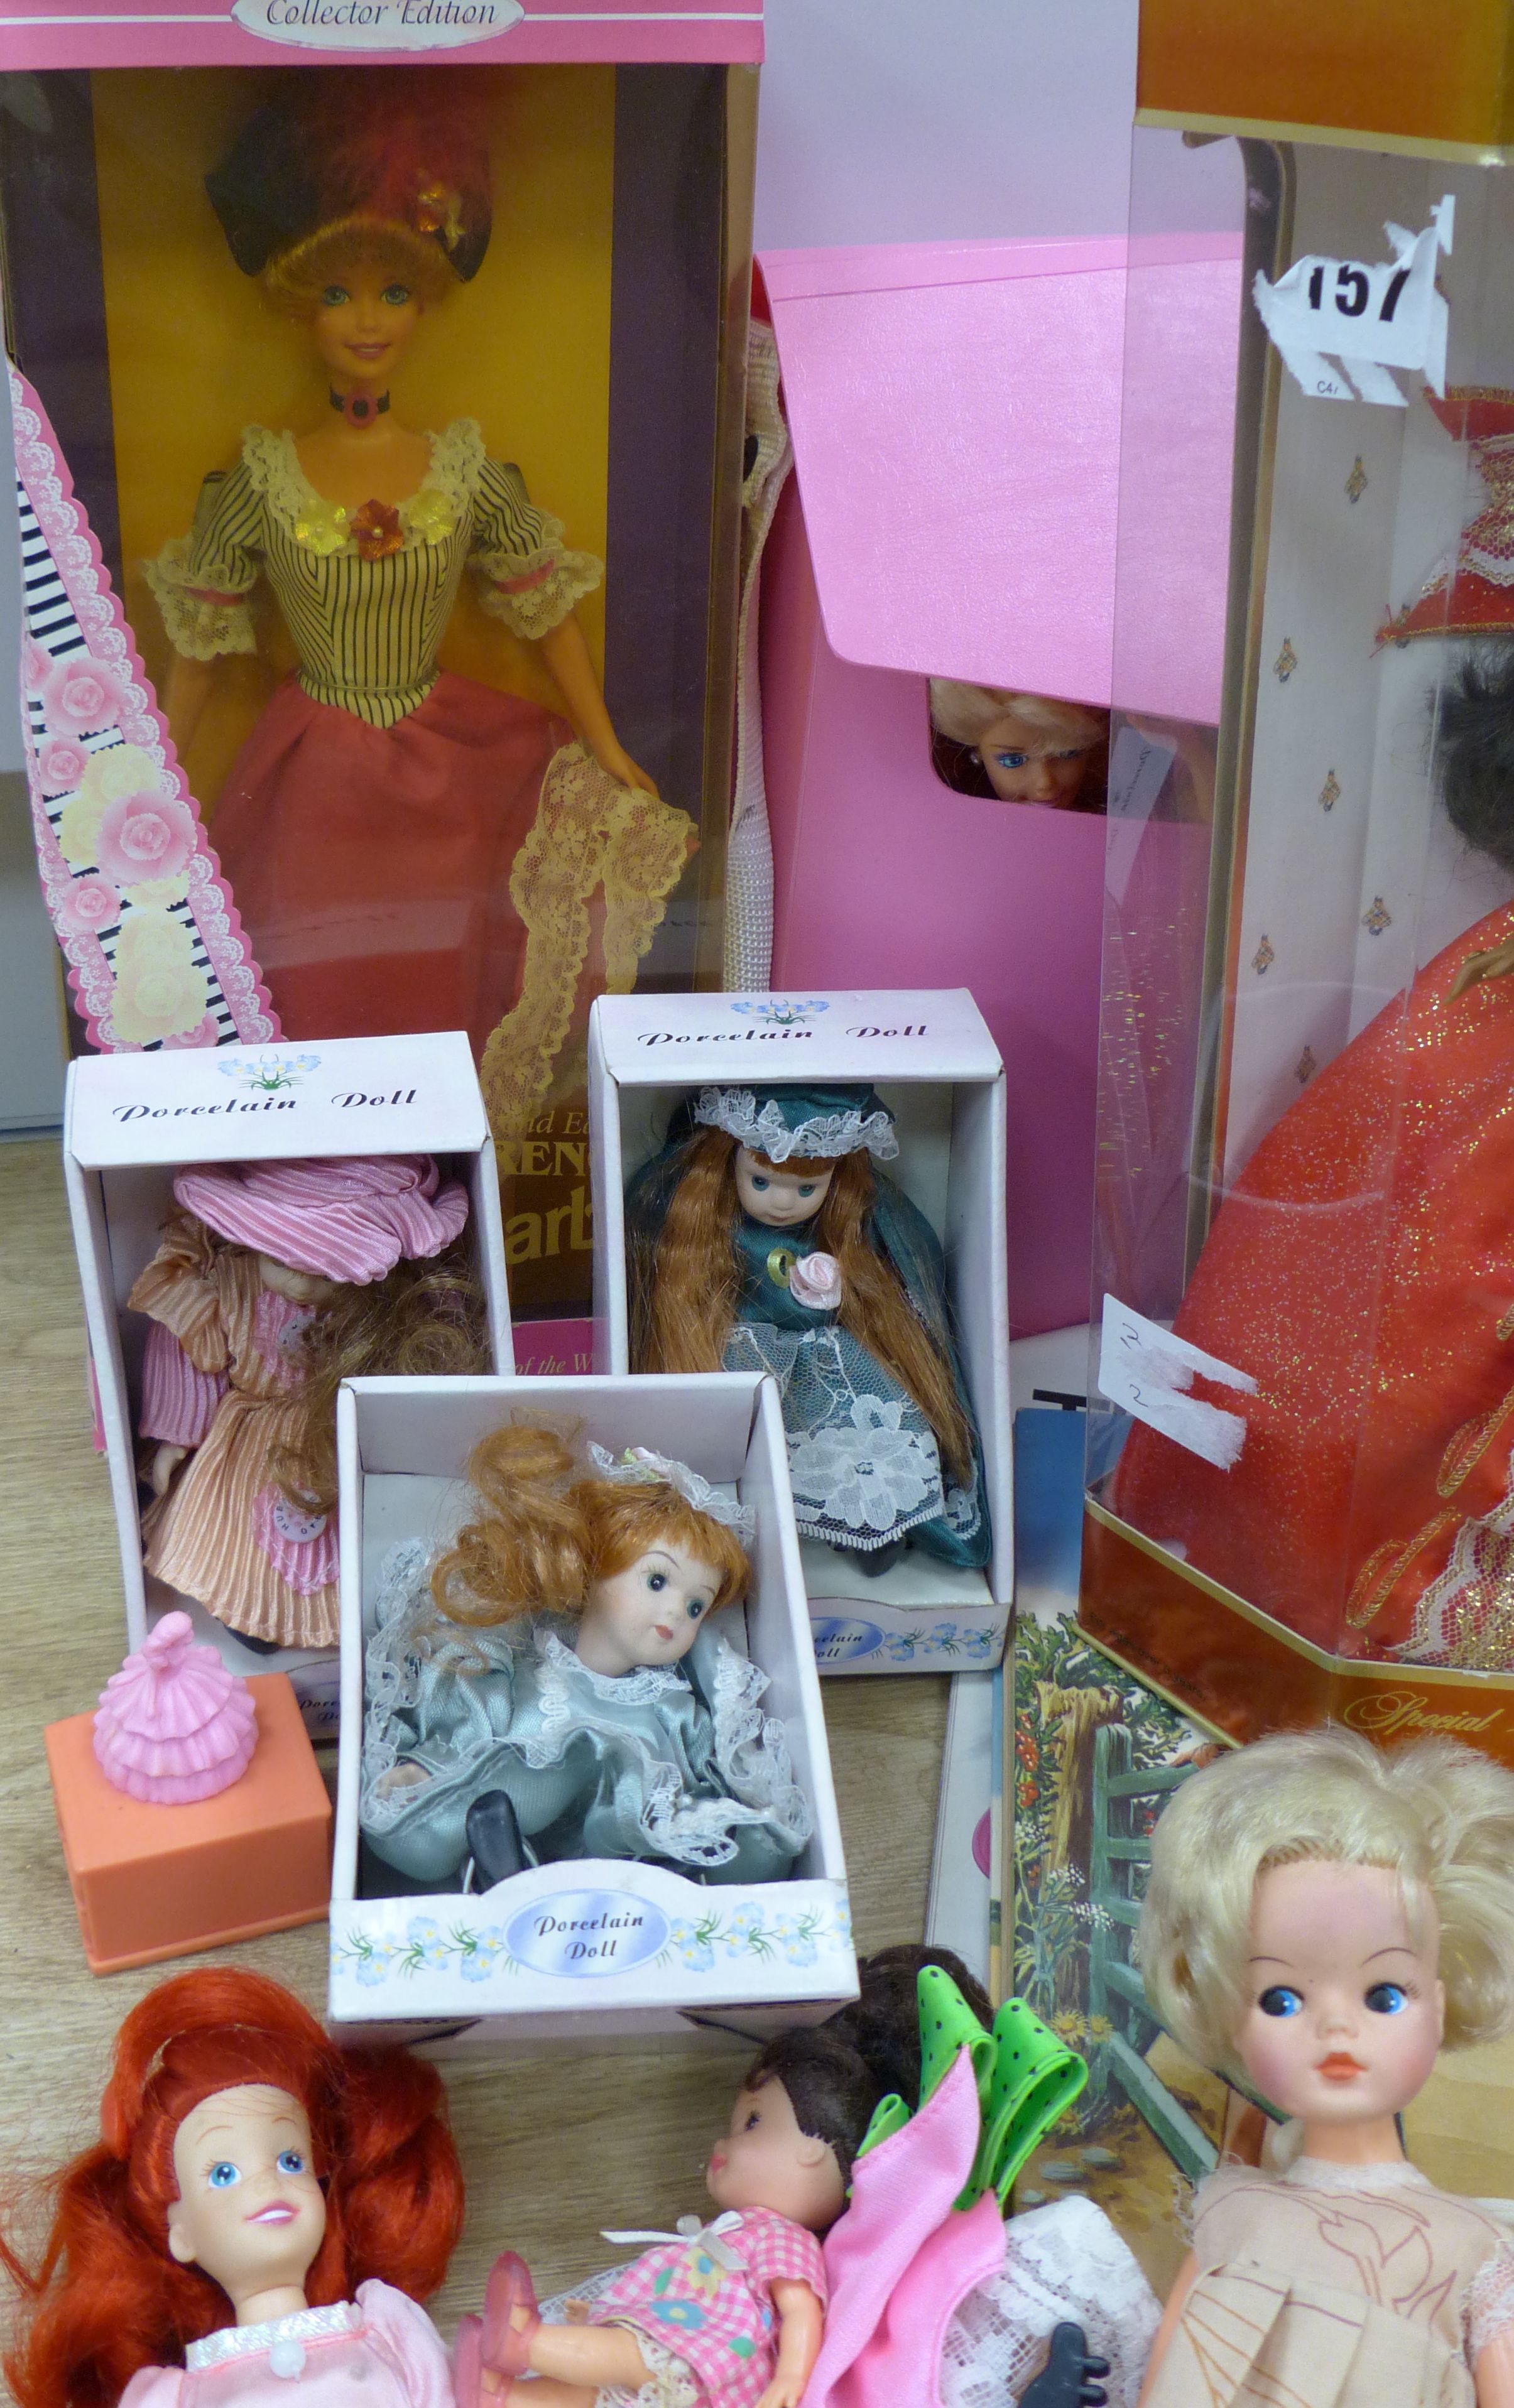 Six various Barbie dolls and other Barbie and doll related ephemera